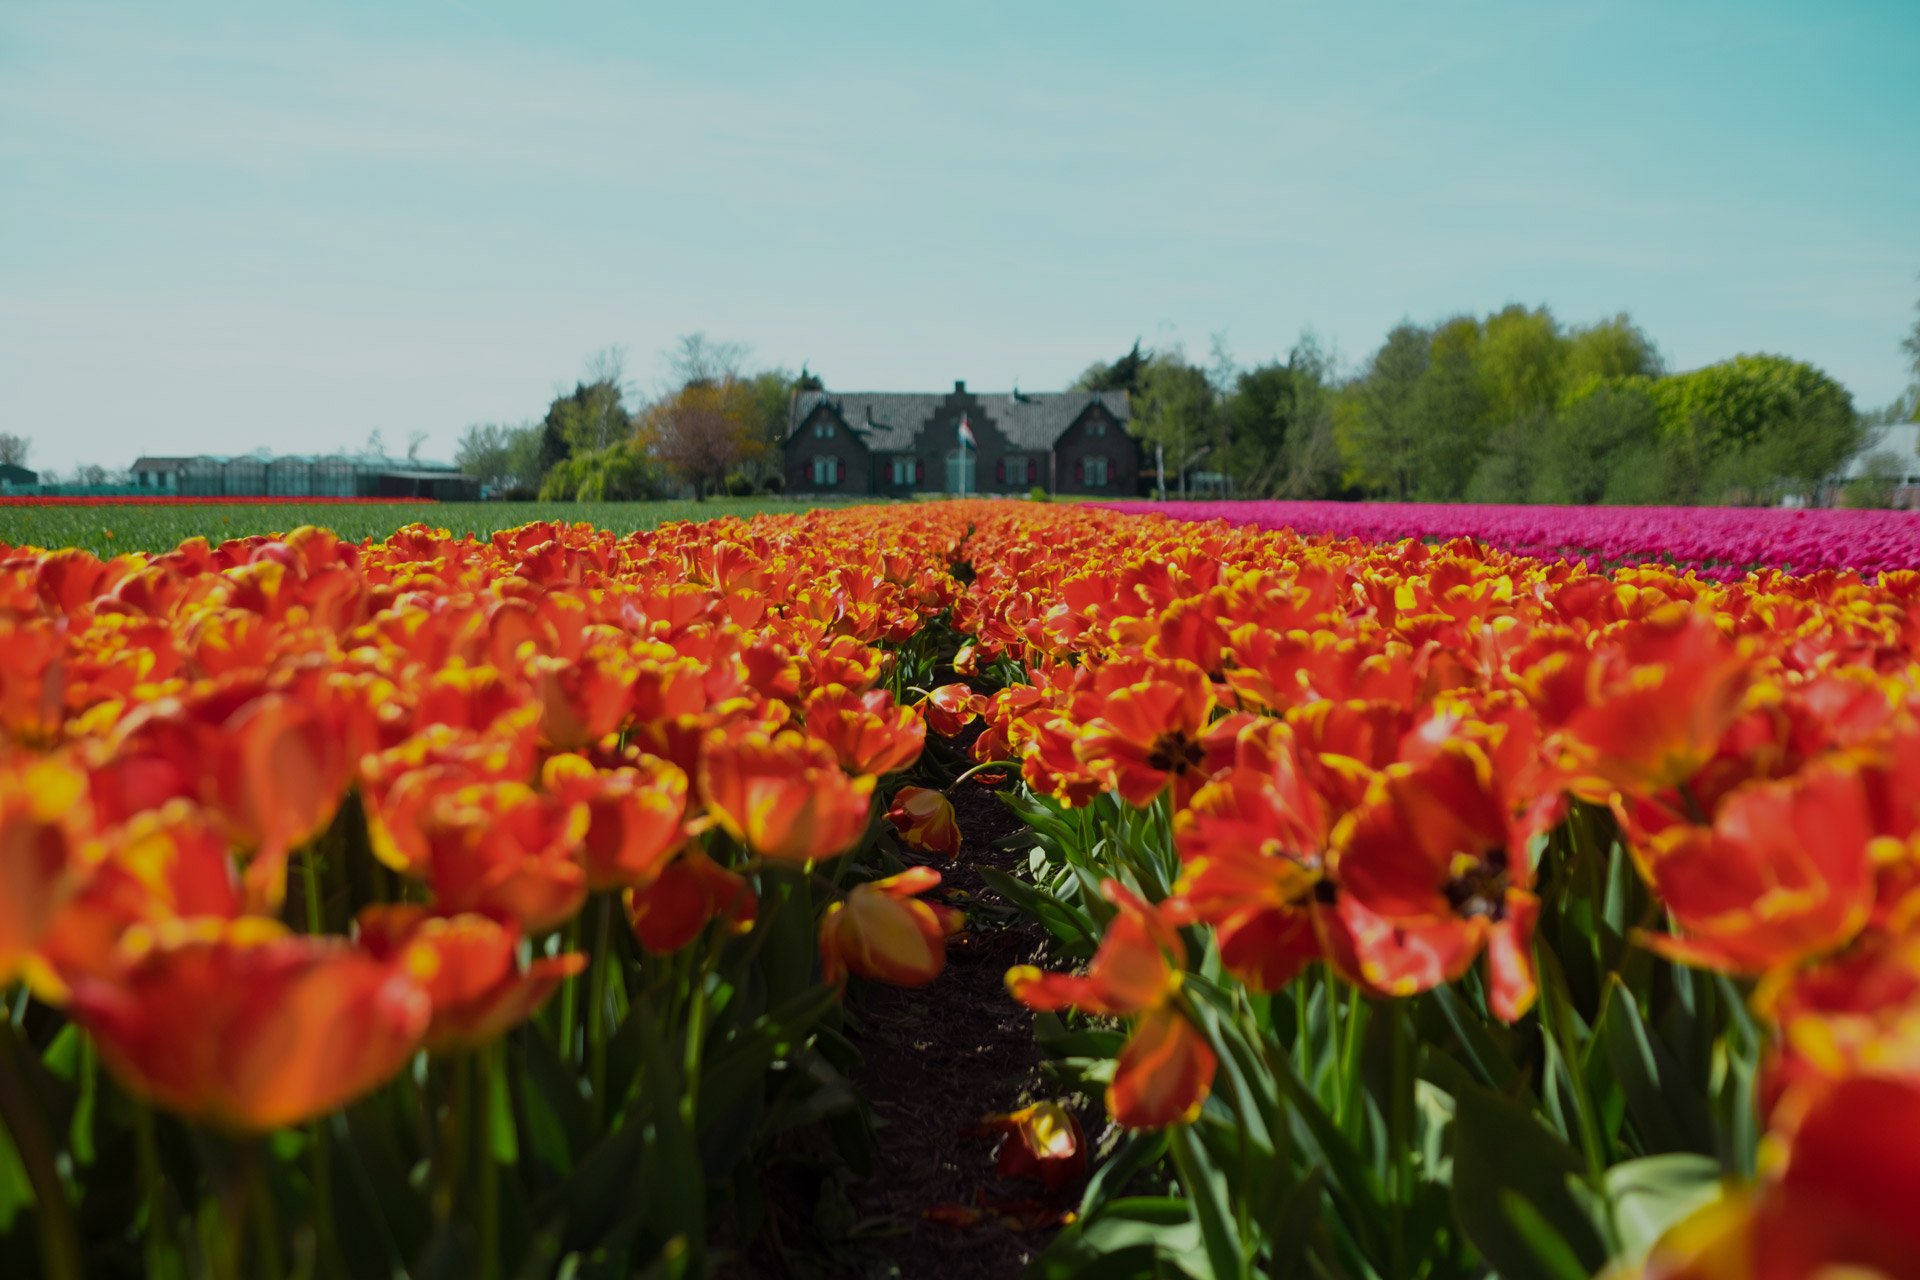 THE NETHERLANDS IN BLOOM